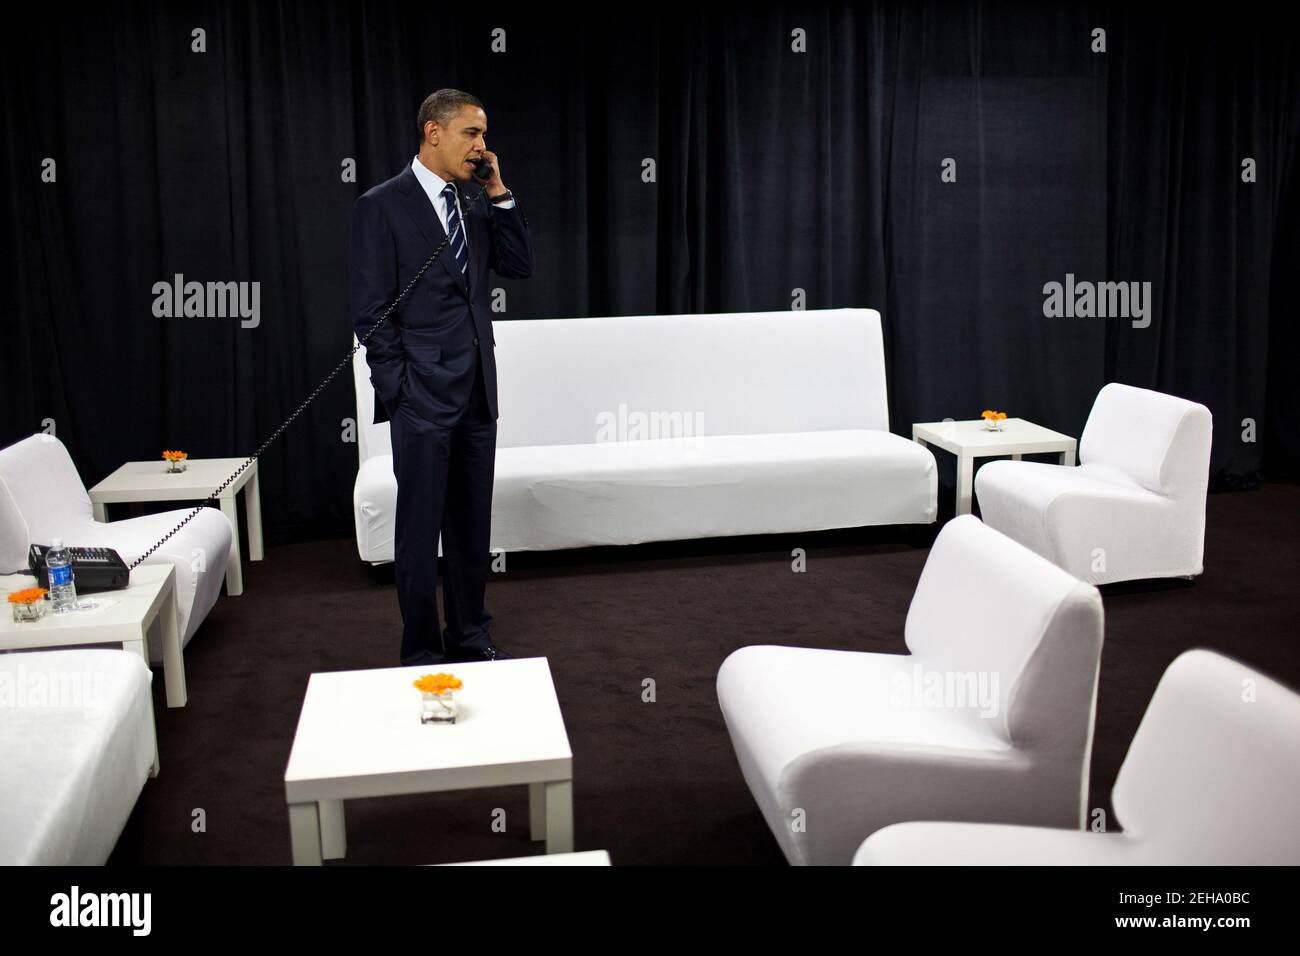 President Barack Obama talks on the phone with National Security Advisor Tom Donilon about developments in the Middle East, while backstage at Intel Corporation in Hillsboro, Ore., Feb. 18, 2011. Stock Photo